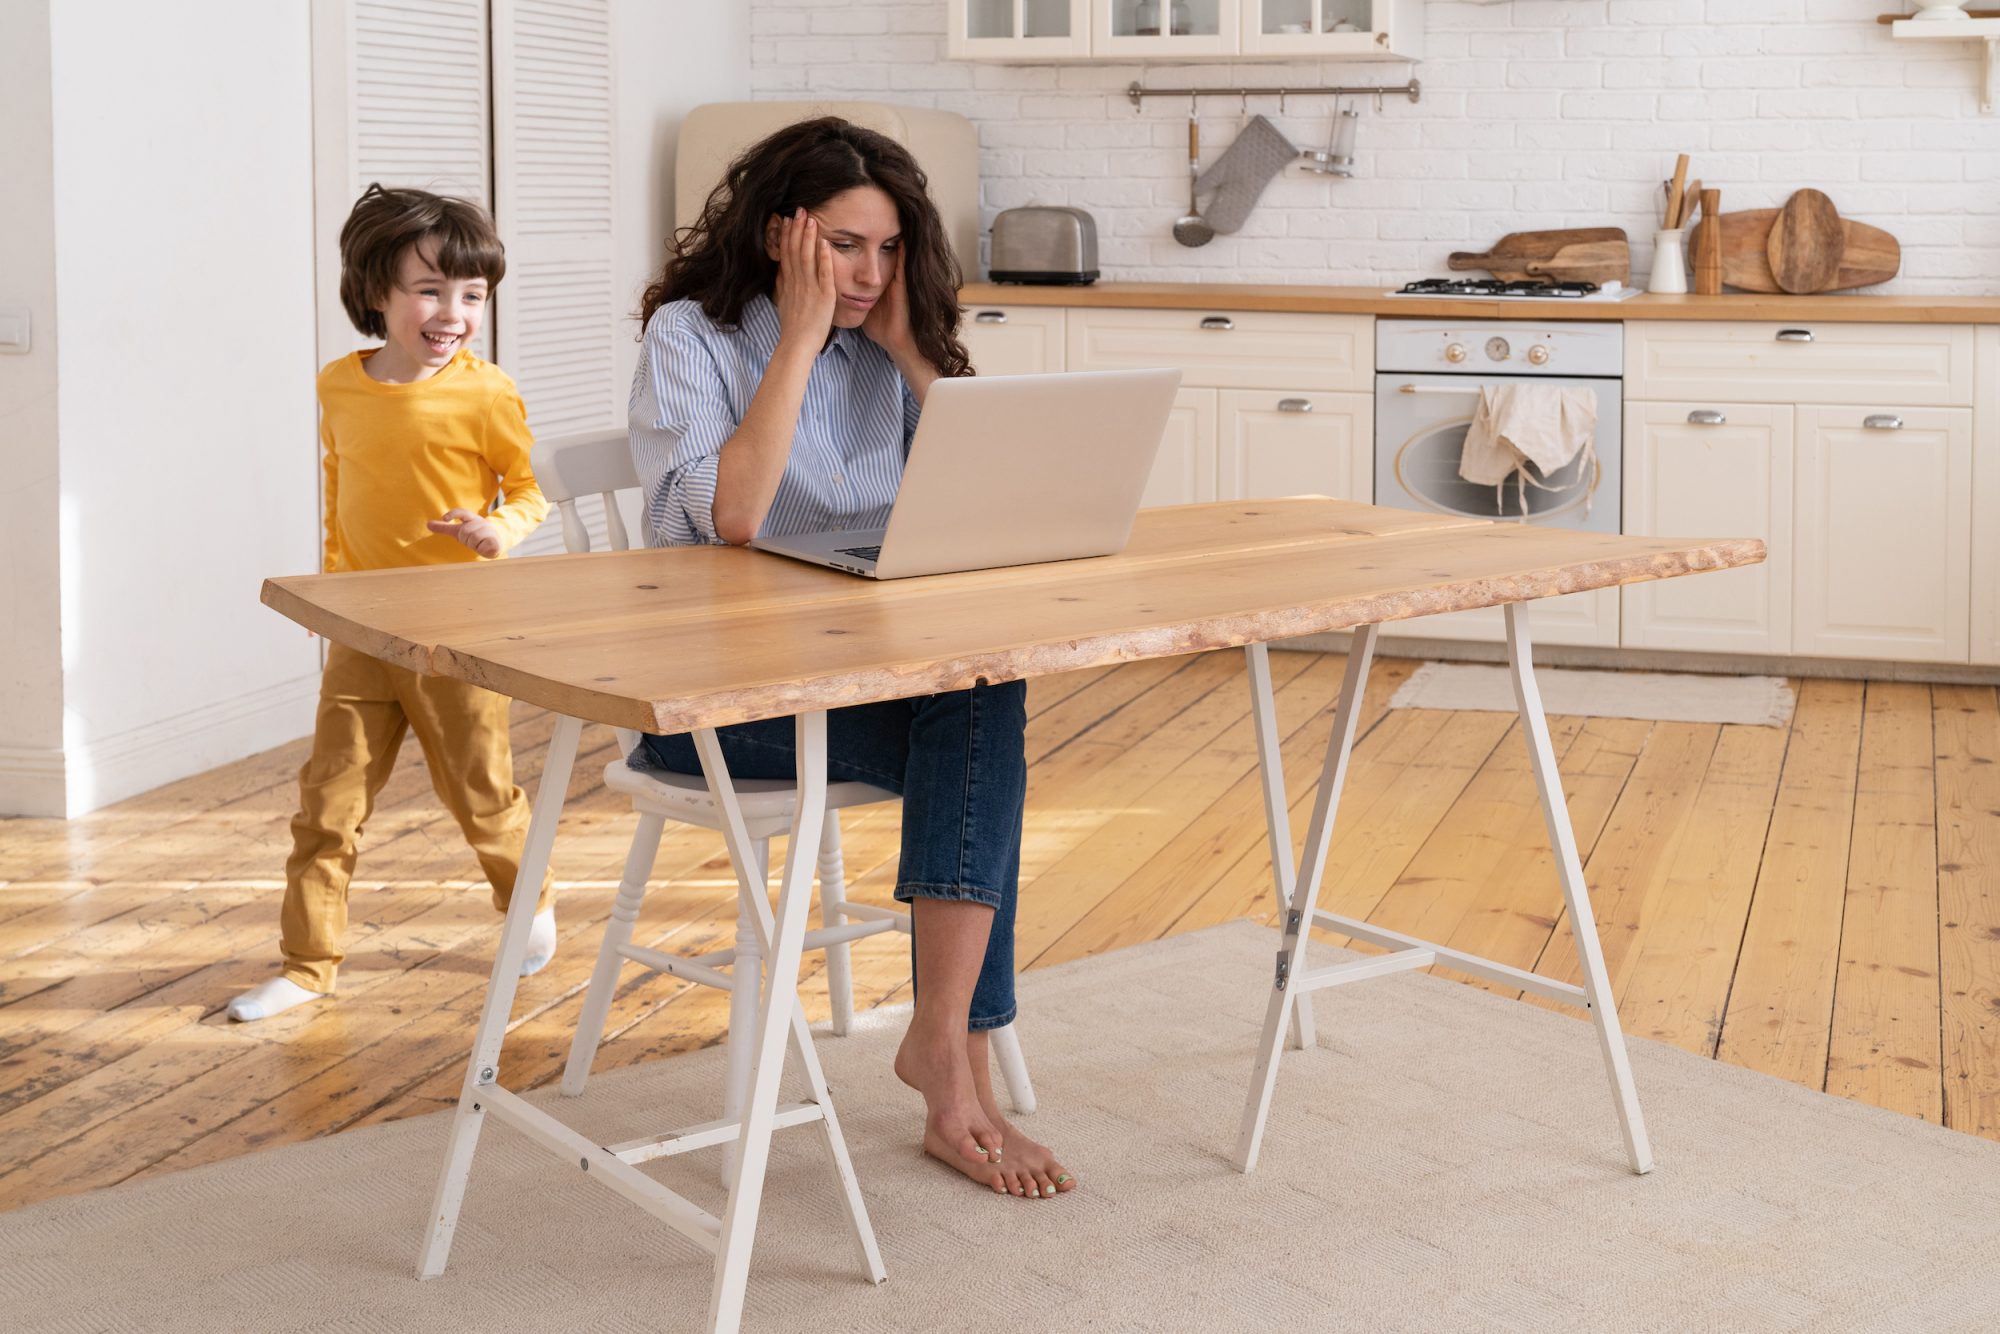 Distance learning is a nightmare for working mothers